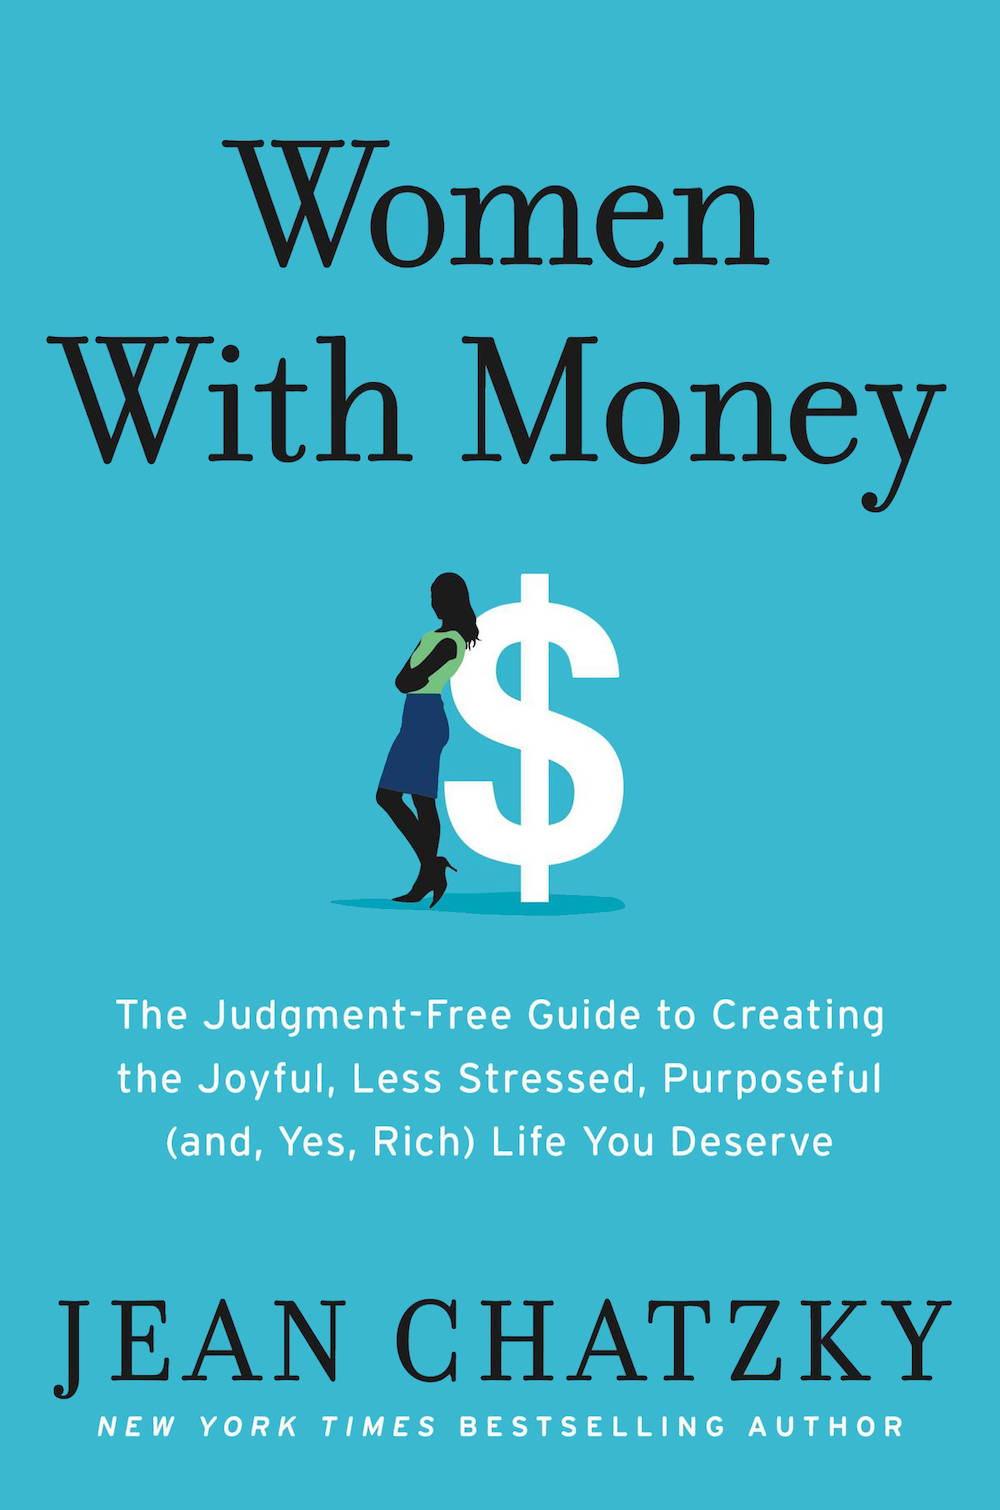 Jean Chatzky's book Women with Money